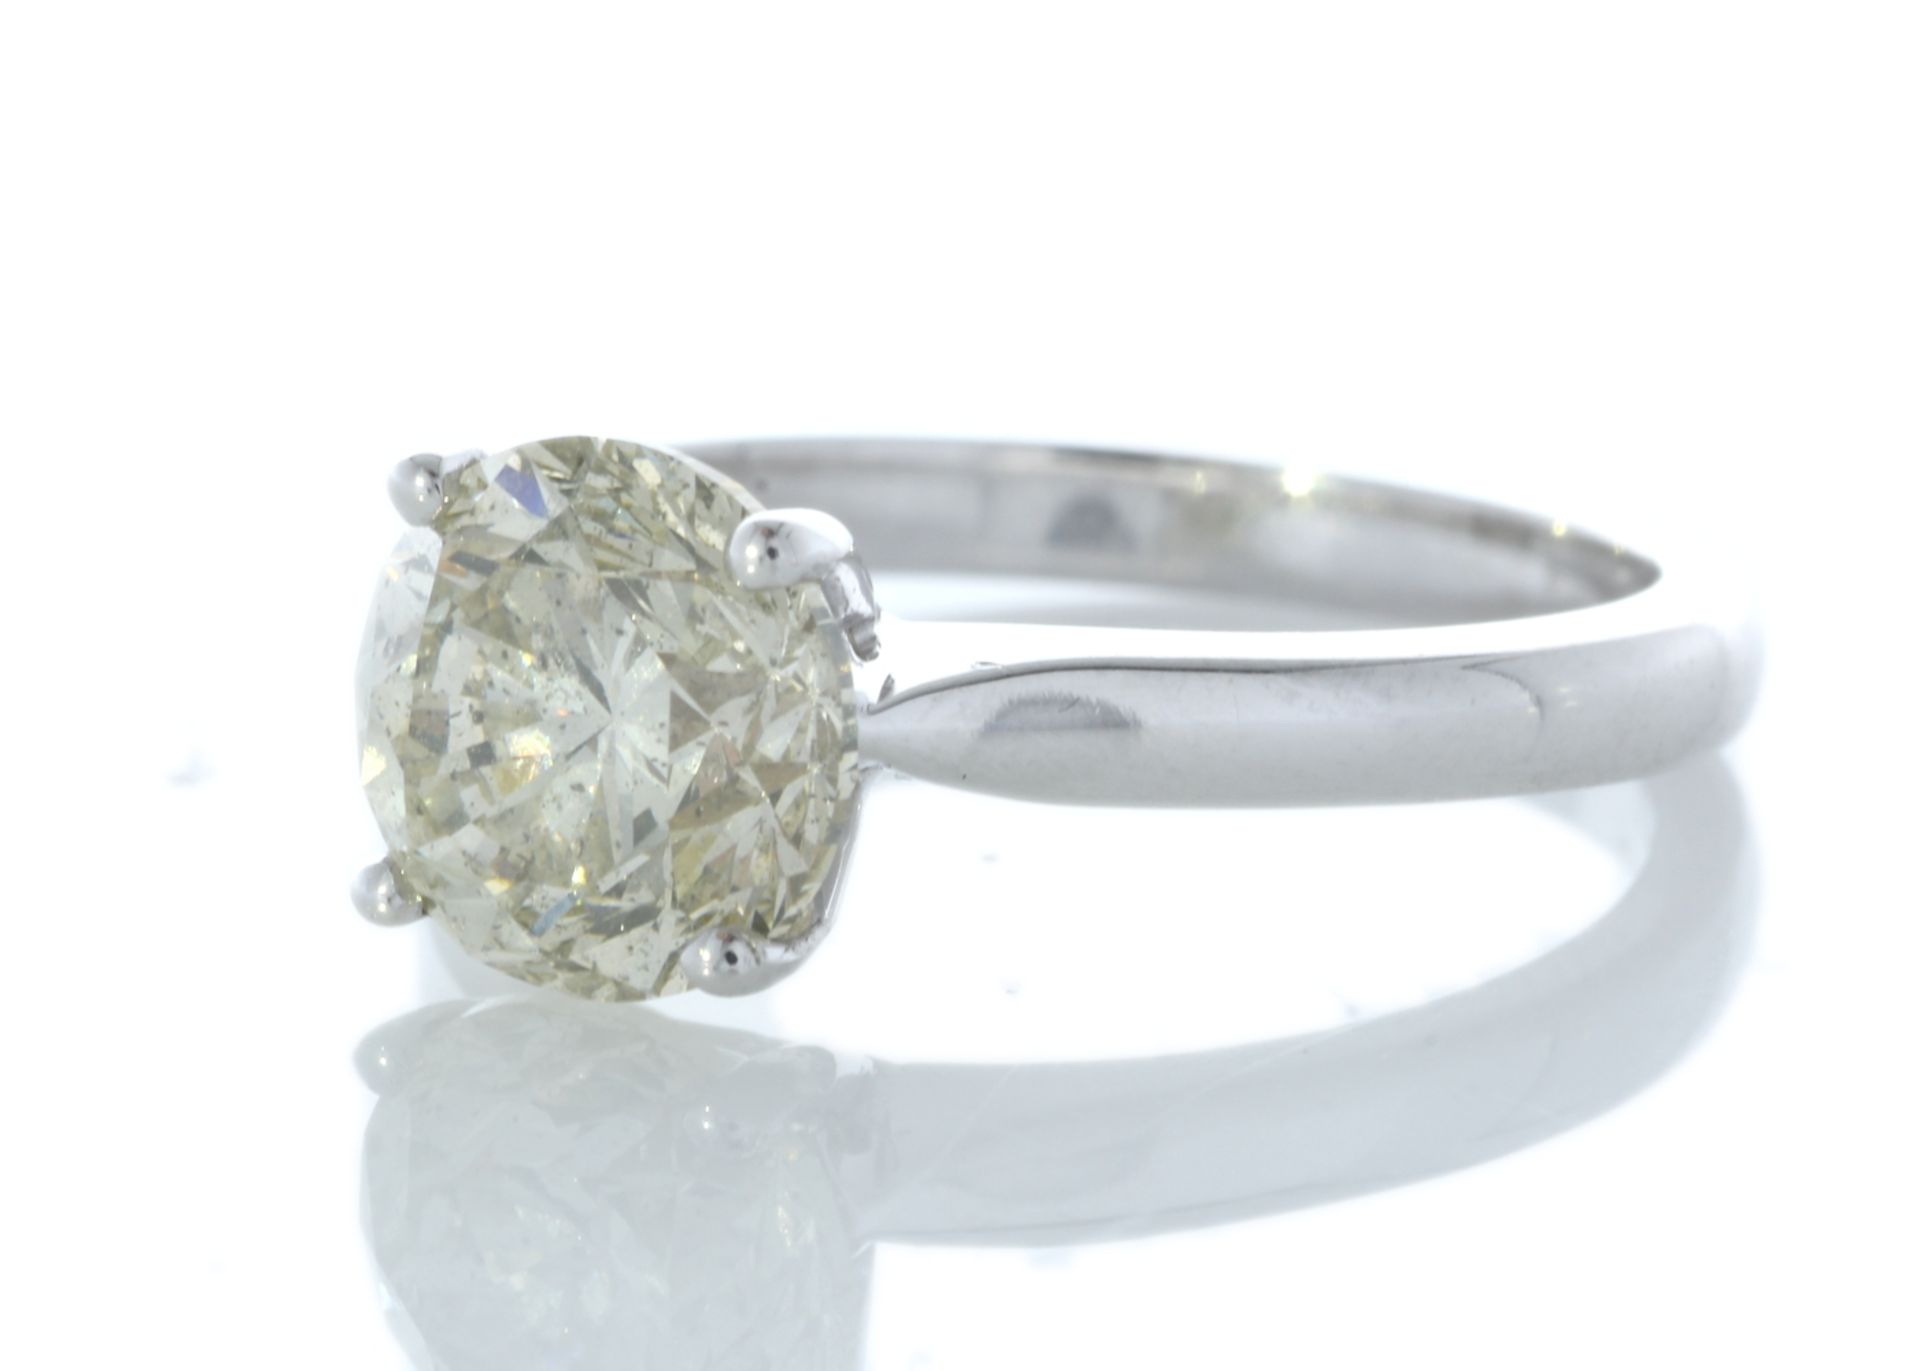 18ct White Gold Single Stone Rex Set Diamond Ring 2.29 Carats - Valued by GIE £49,150.00 - A massive - Image 2 of 5